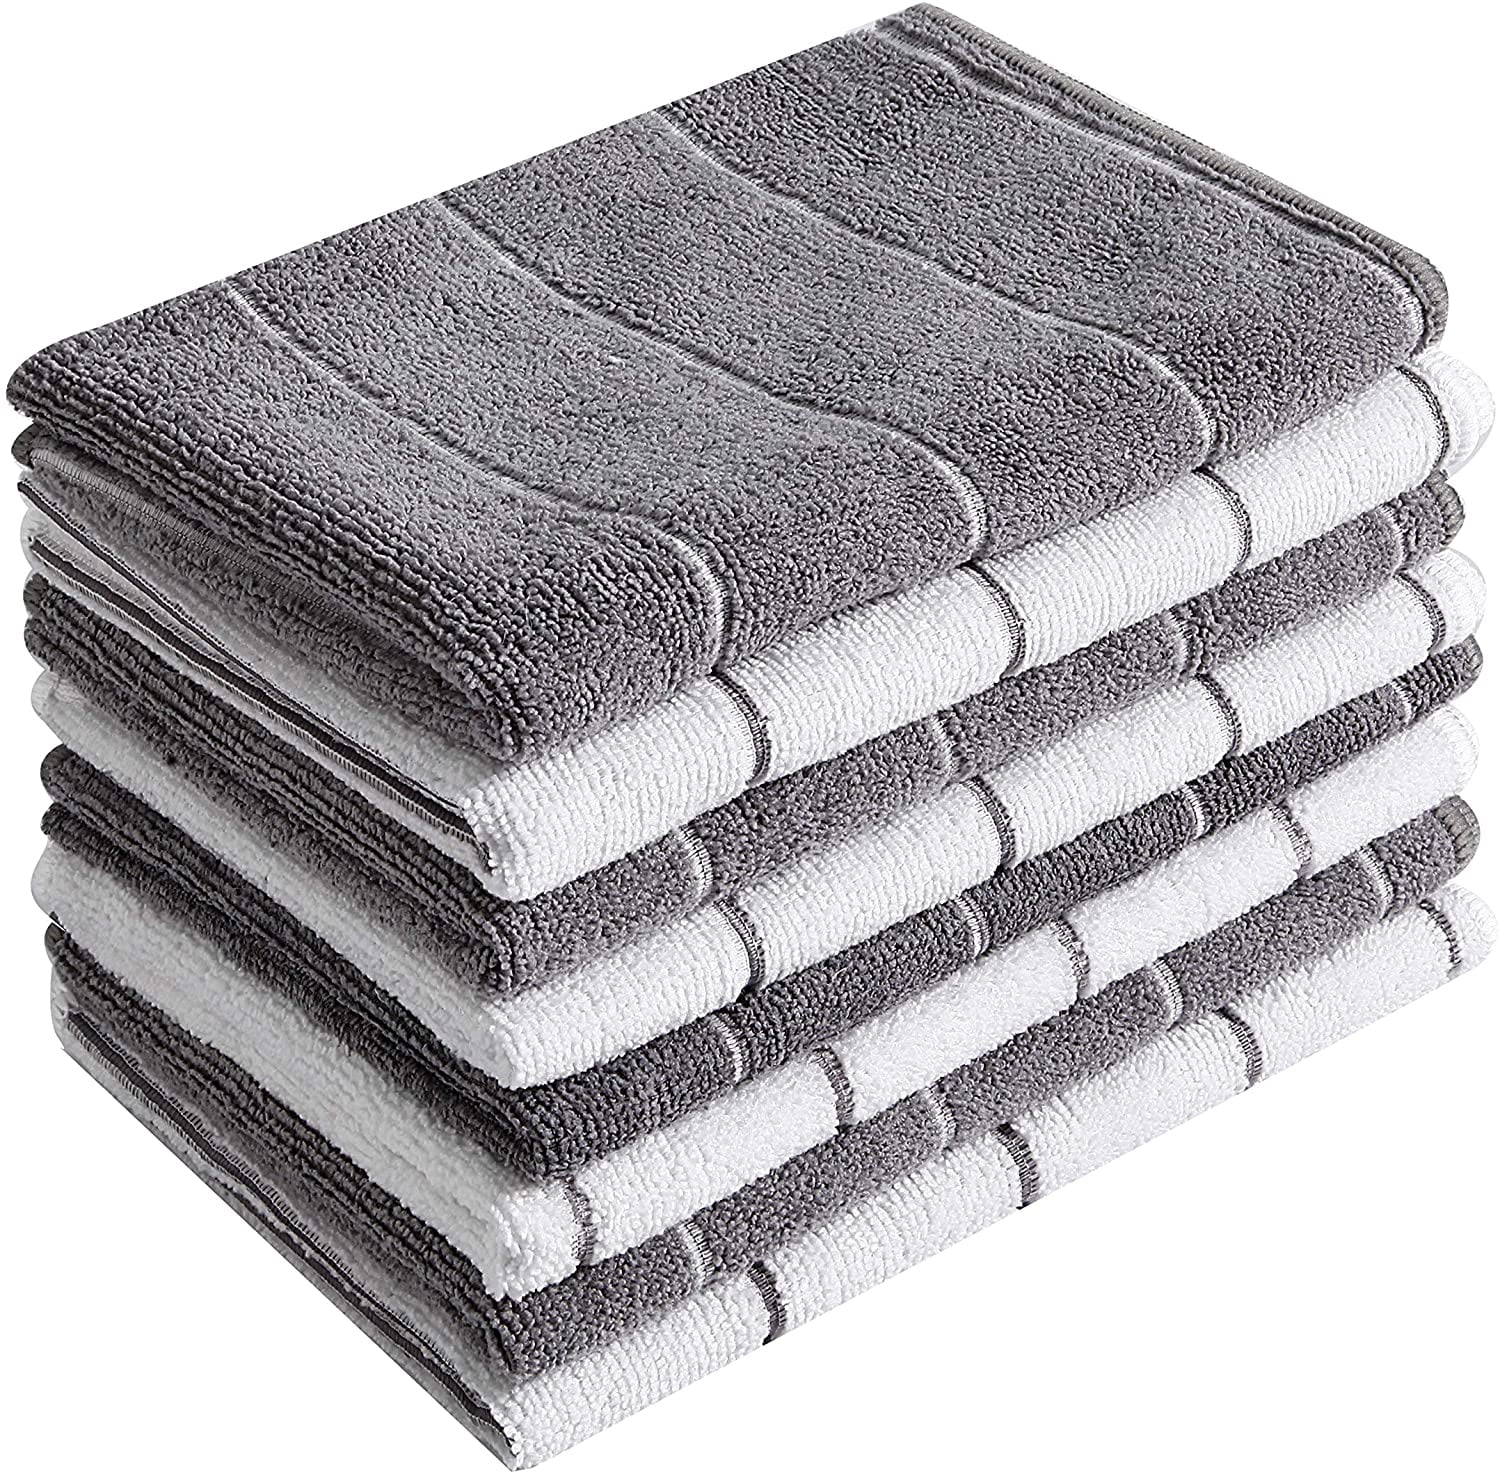 Microfiber Kitchen Towels Stripe Designed Grey and White Colors 8 Pack Super Absorbent Soft and Solid Color Dish Towels 26 x 18 Inch 